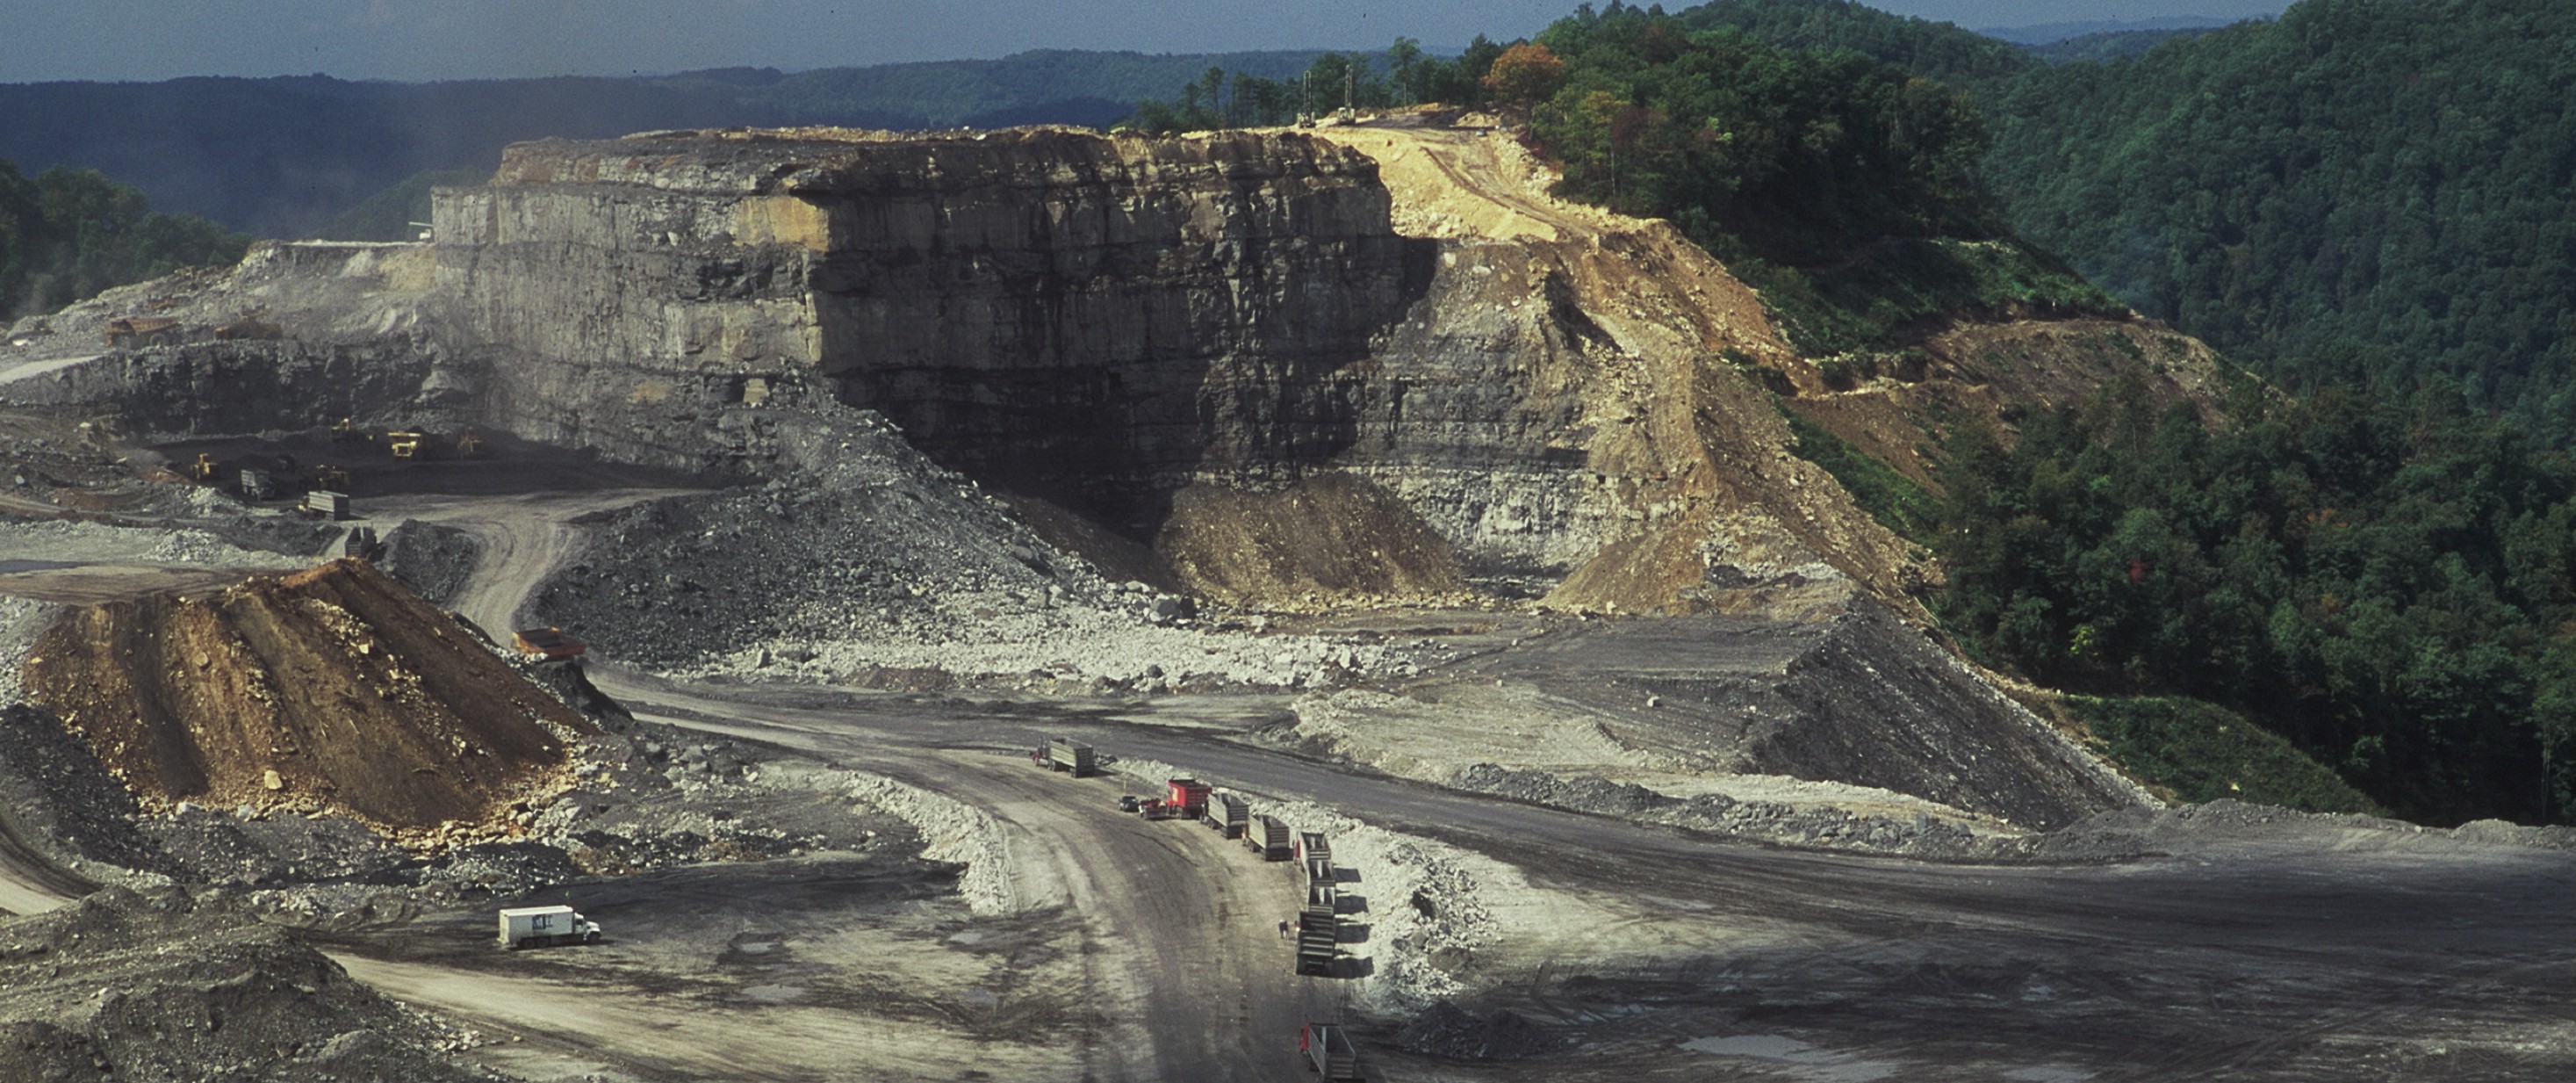 As West Virginia coal industry dries up, state struggles to find ...